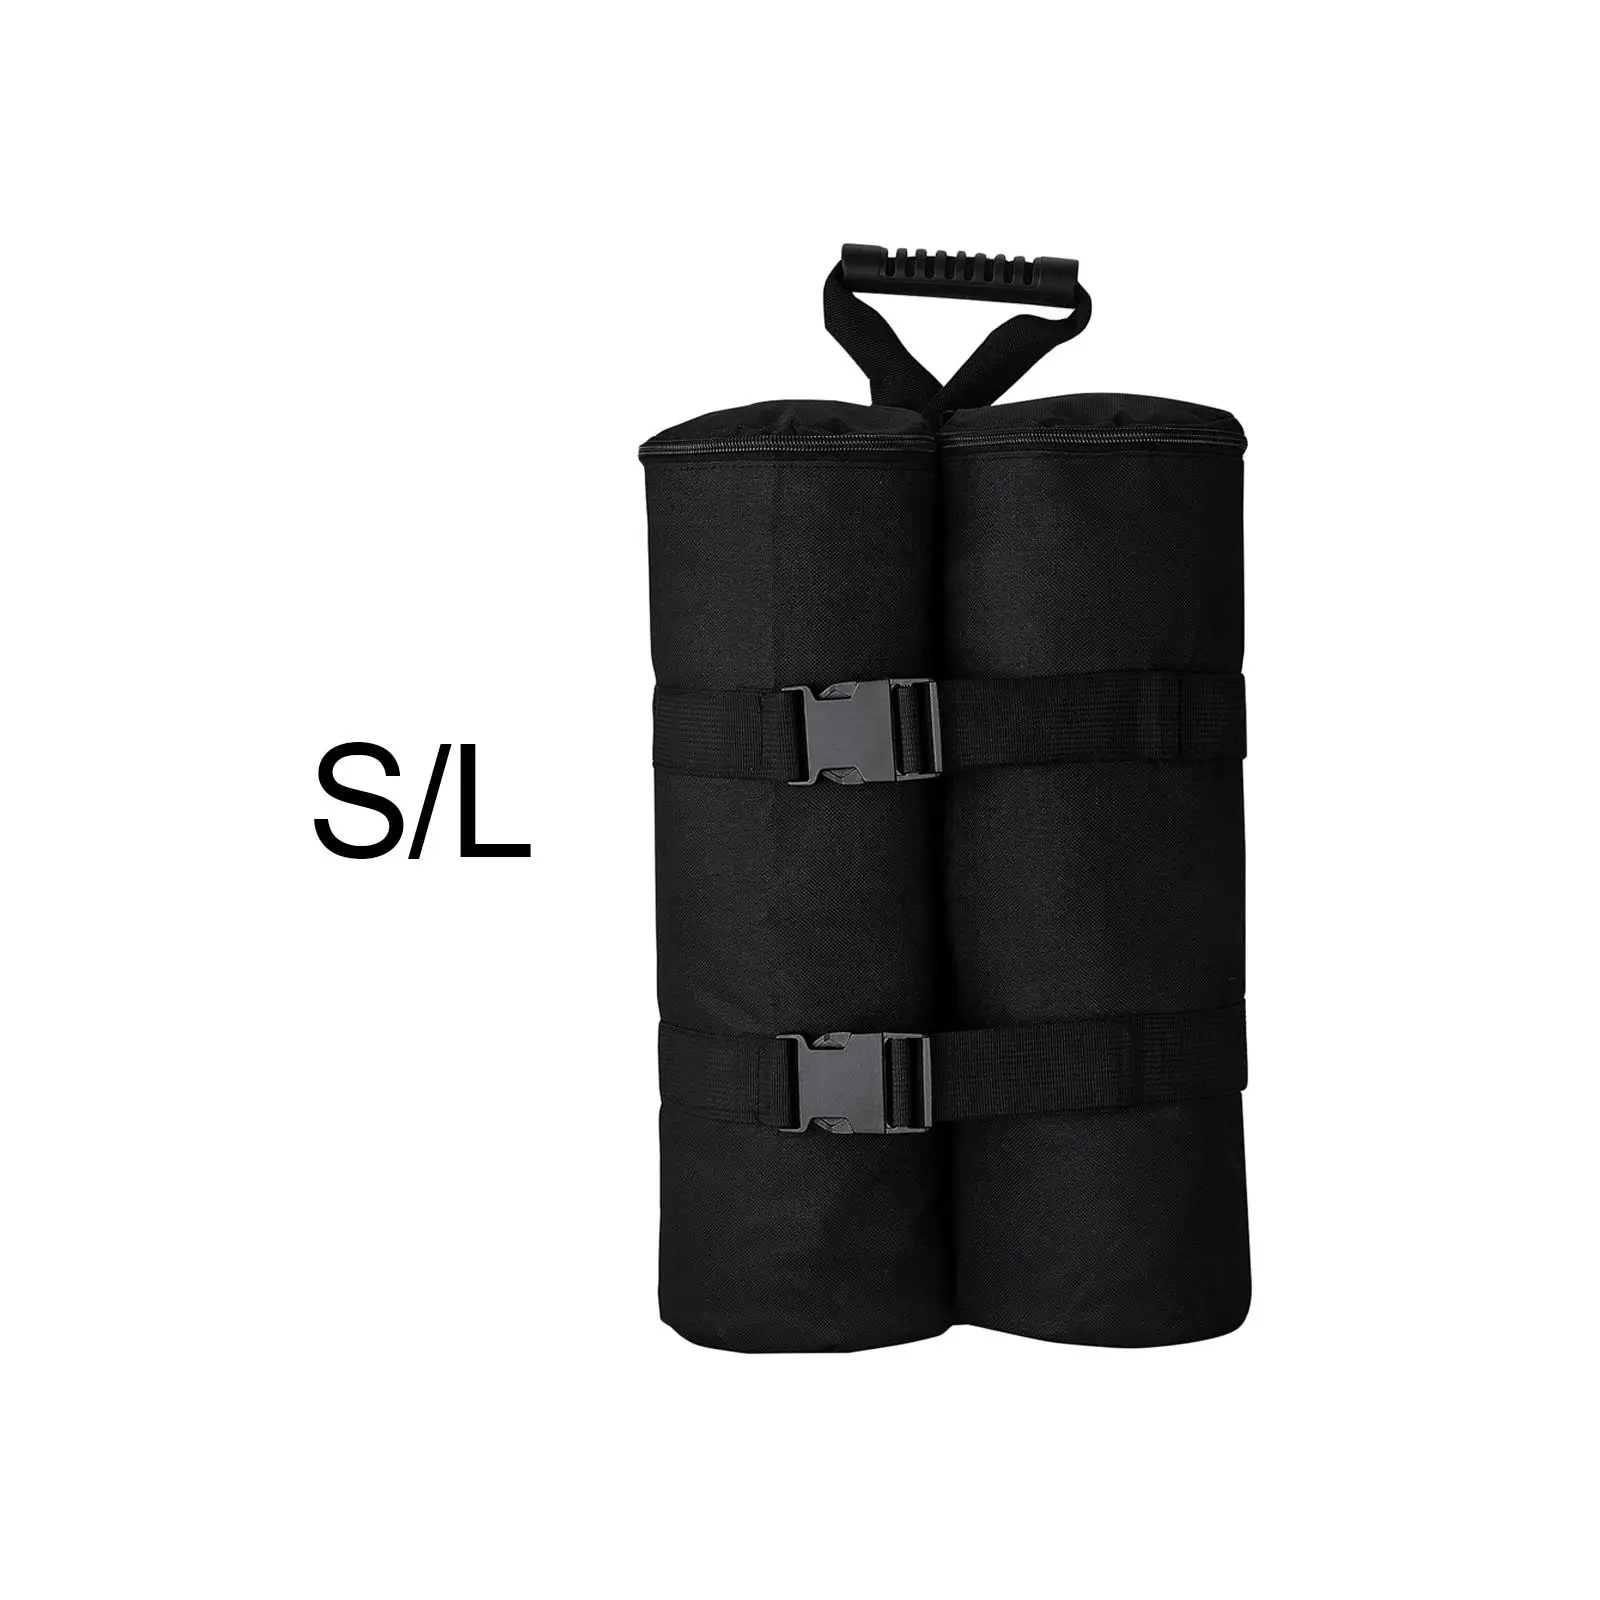 Large Weight Bags for Awning, Awning Weights Sandbag for Tent Patio Umbrella